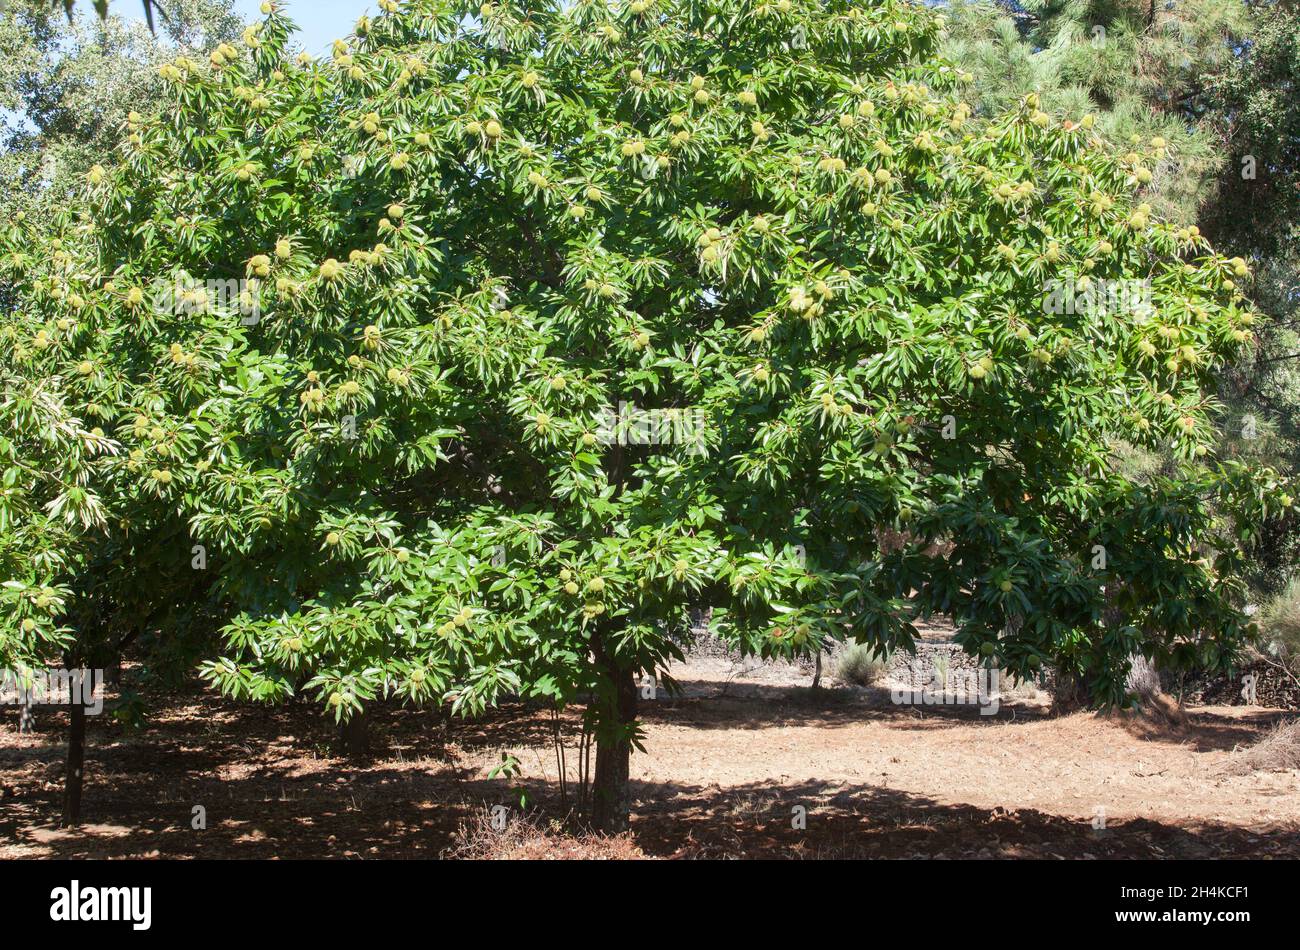 Sweet chestnut tree. Castanea sativa or Spanish chestnut tree plantation at the end of the summer. Stock Photo